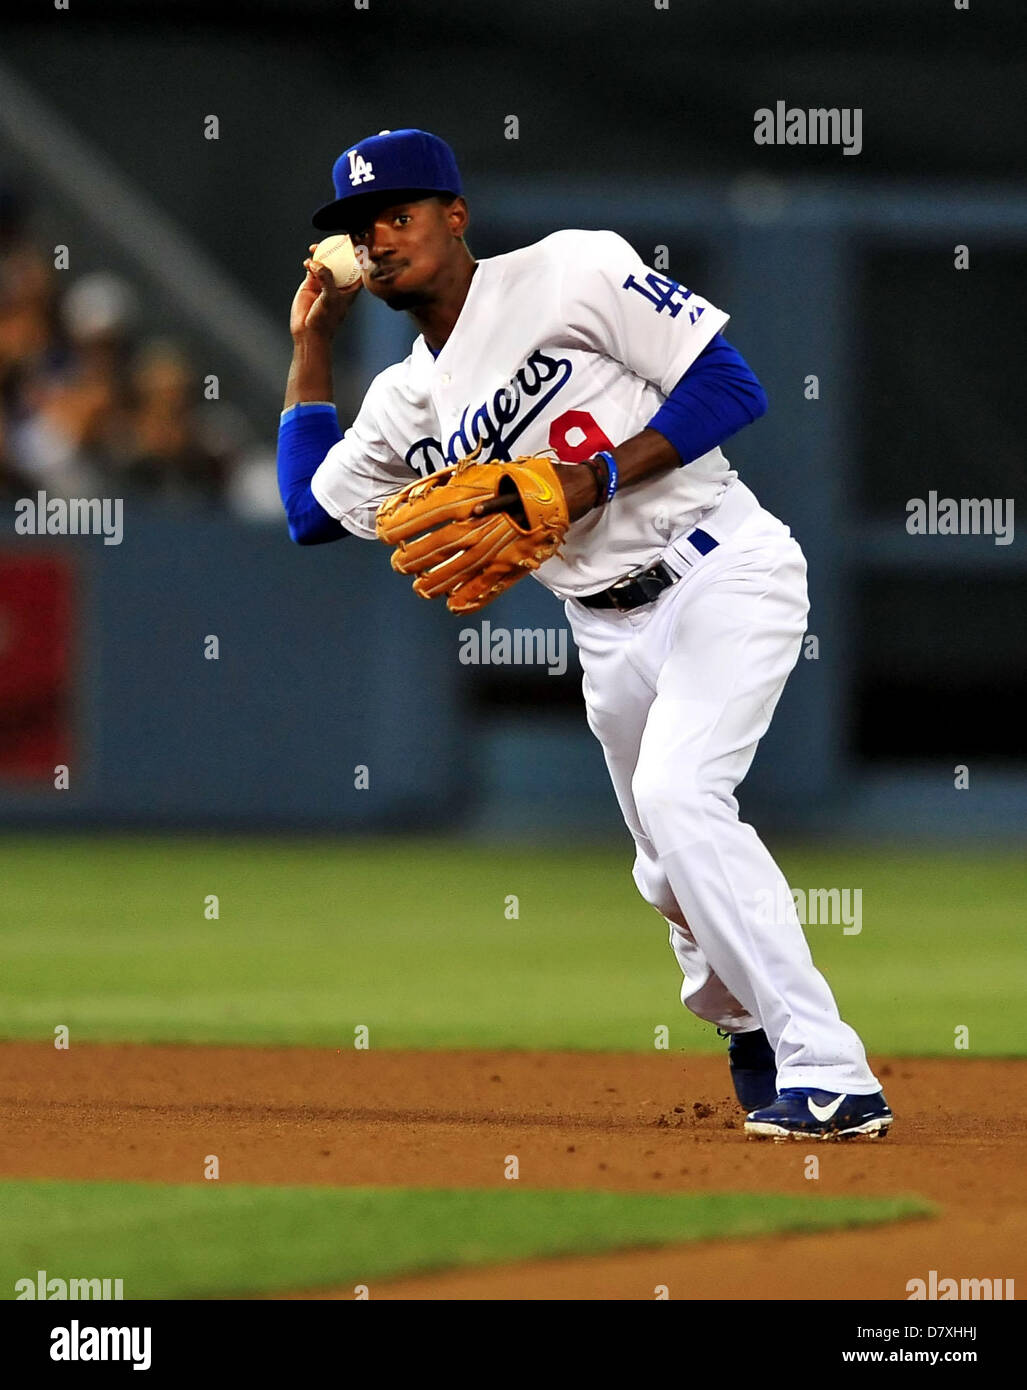 Los Angeles, CA. USA. May 14, 2013. Los Angeles Dodgers shortstop Dee Gordon  #9 throws to 1st base for the out in the 5th inning during the Major League  Baseball game between